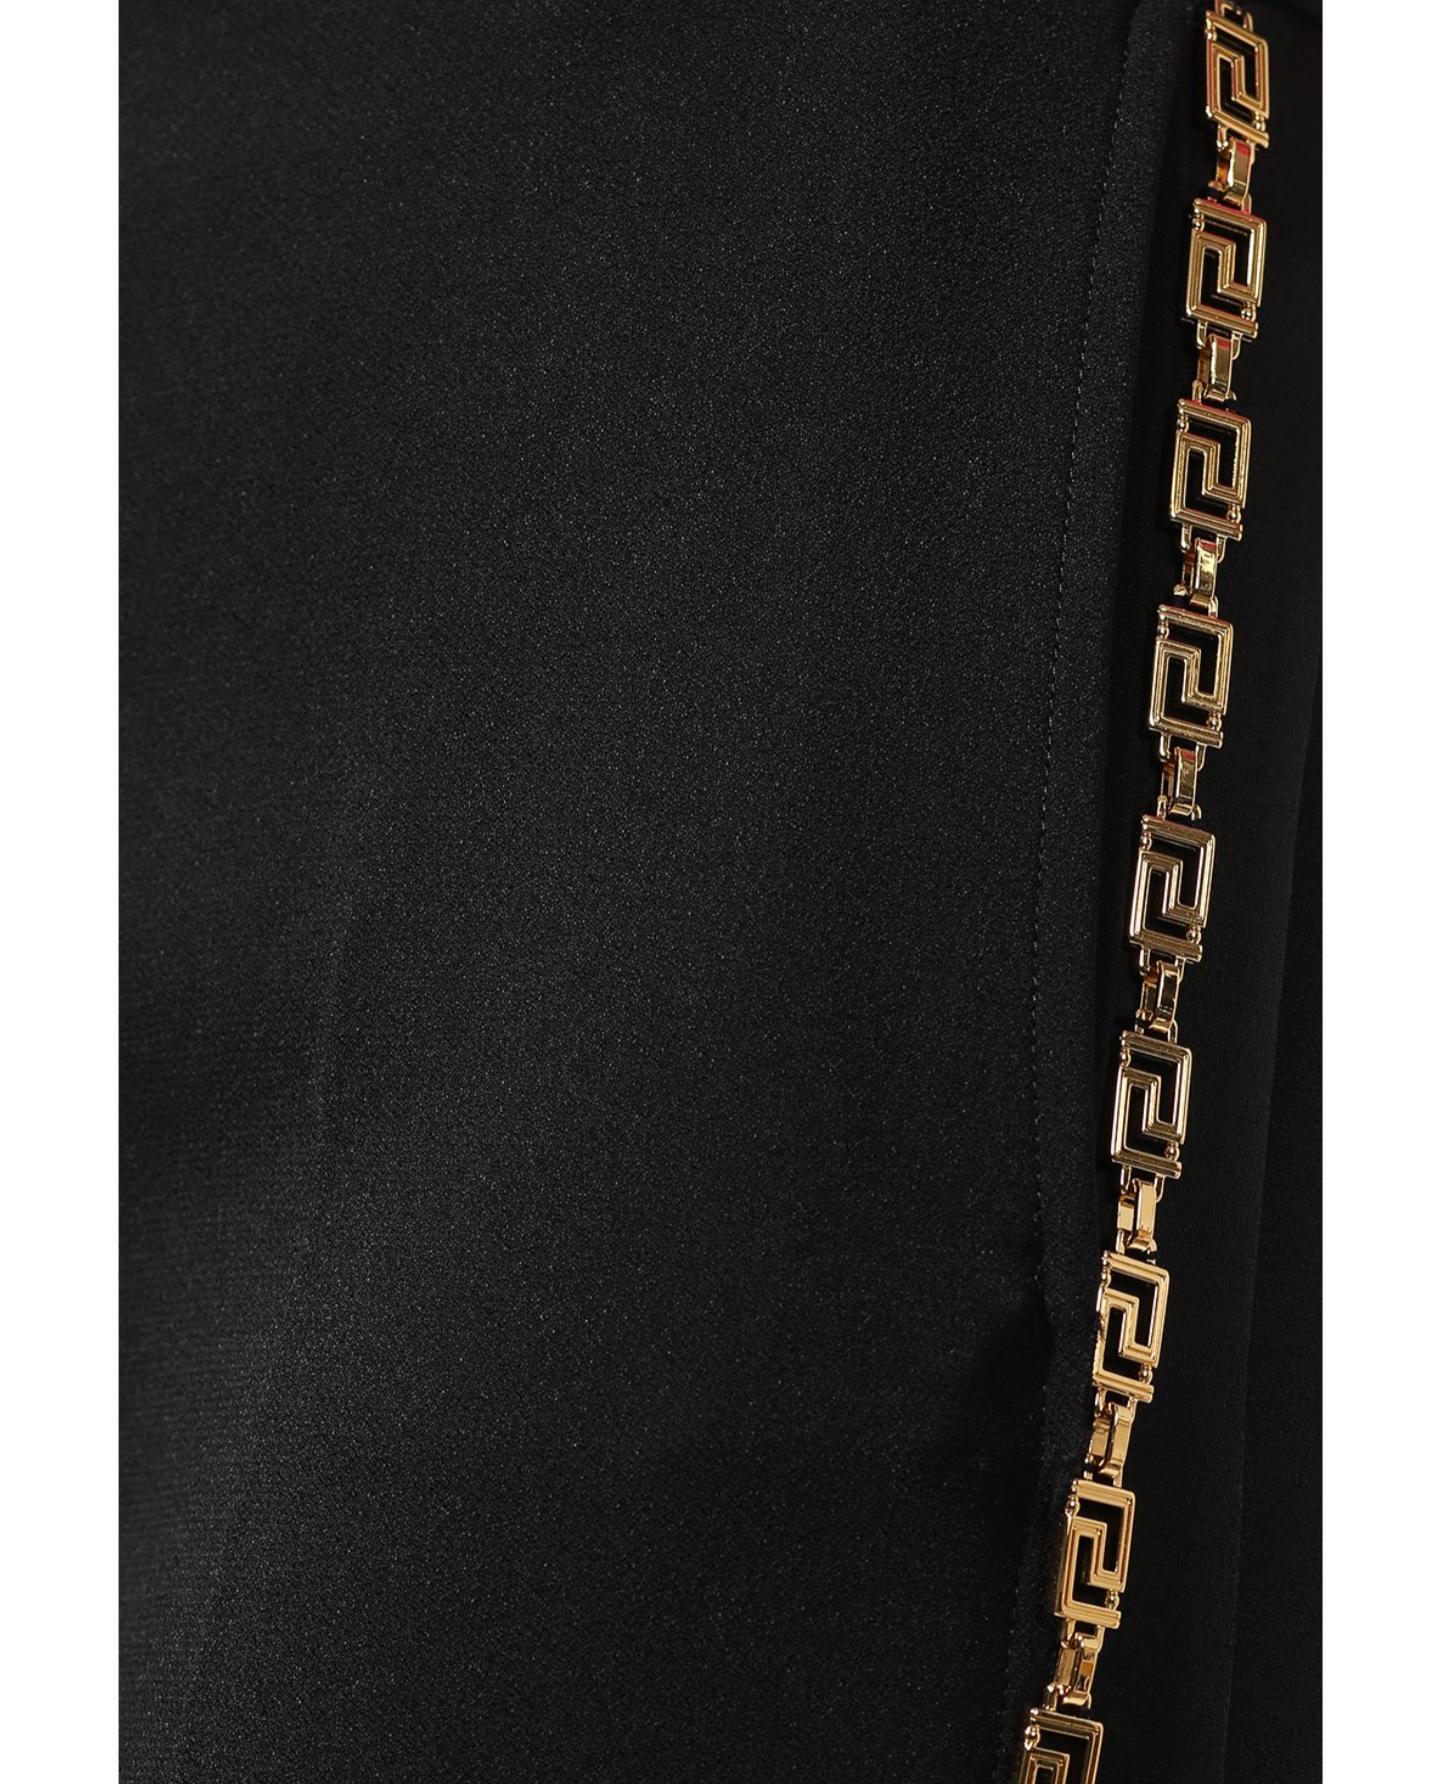 Versace Gold Tone Greca Chain Tailored Black Trousers / Pants Size 38 For Sale 3